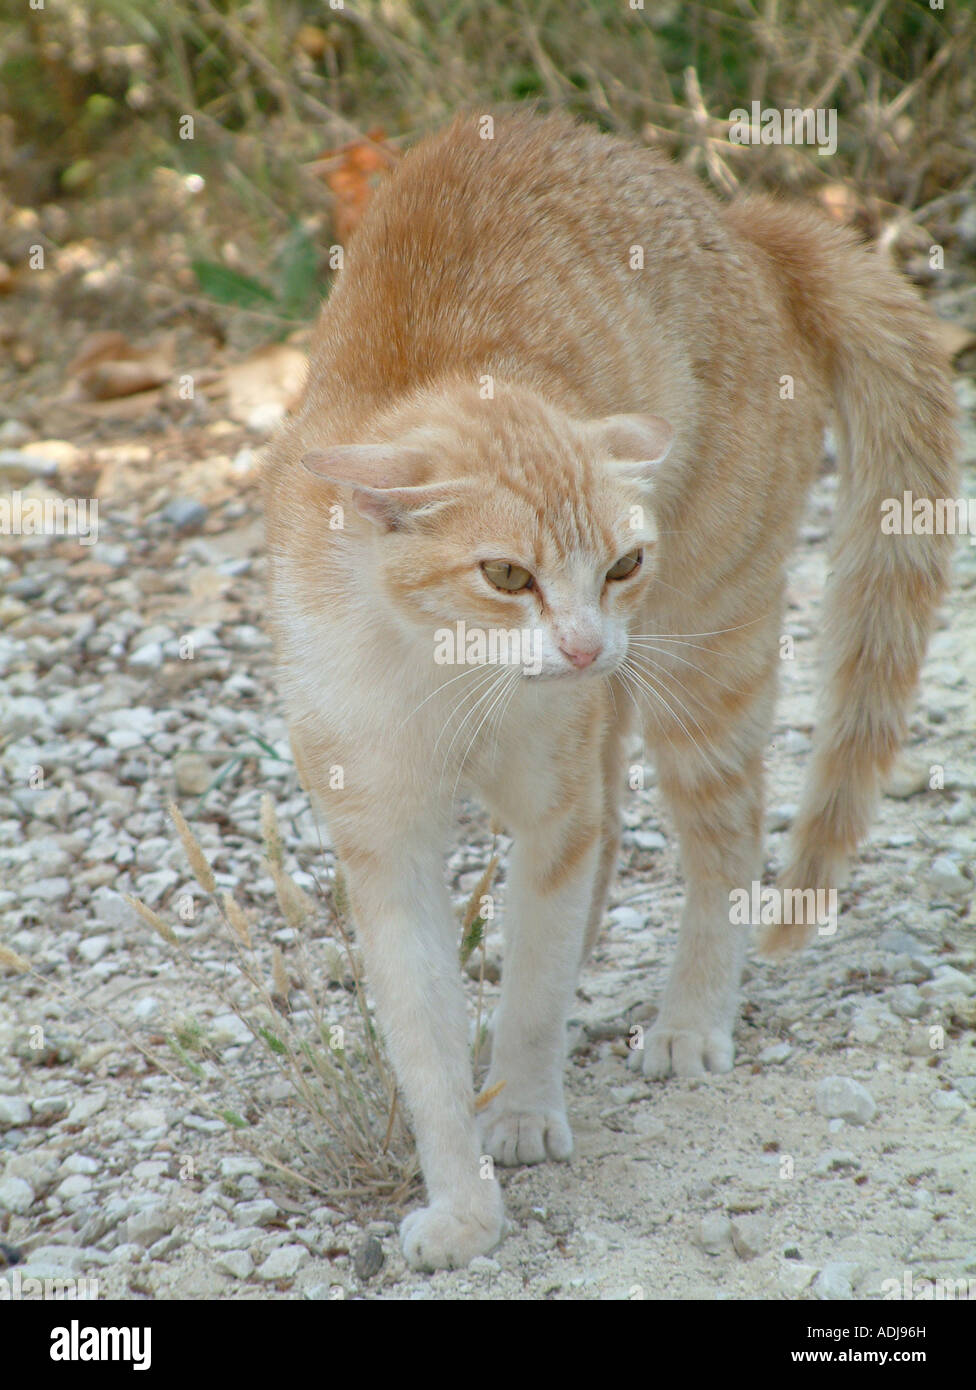 Domestic cat, Felis silvestris catus, hissing and arching its back to make itself appear larger Stock Photo